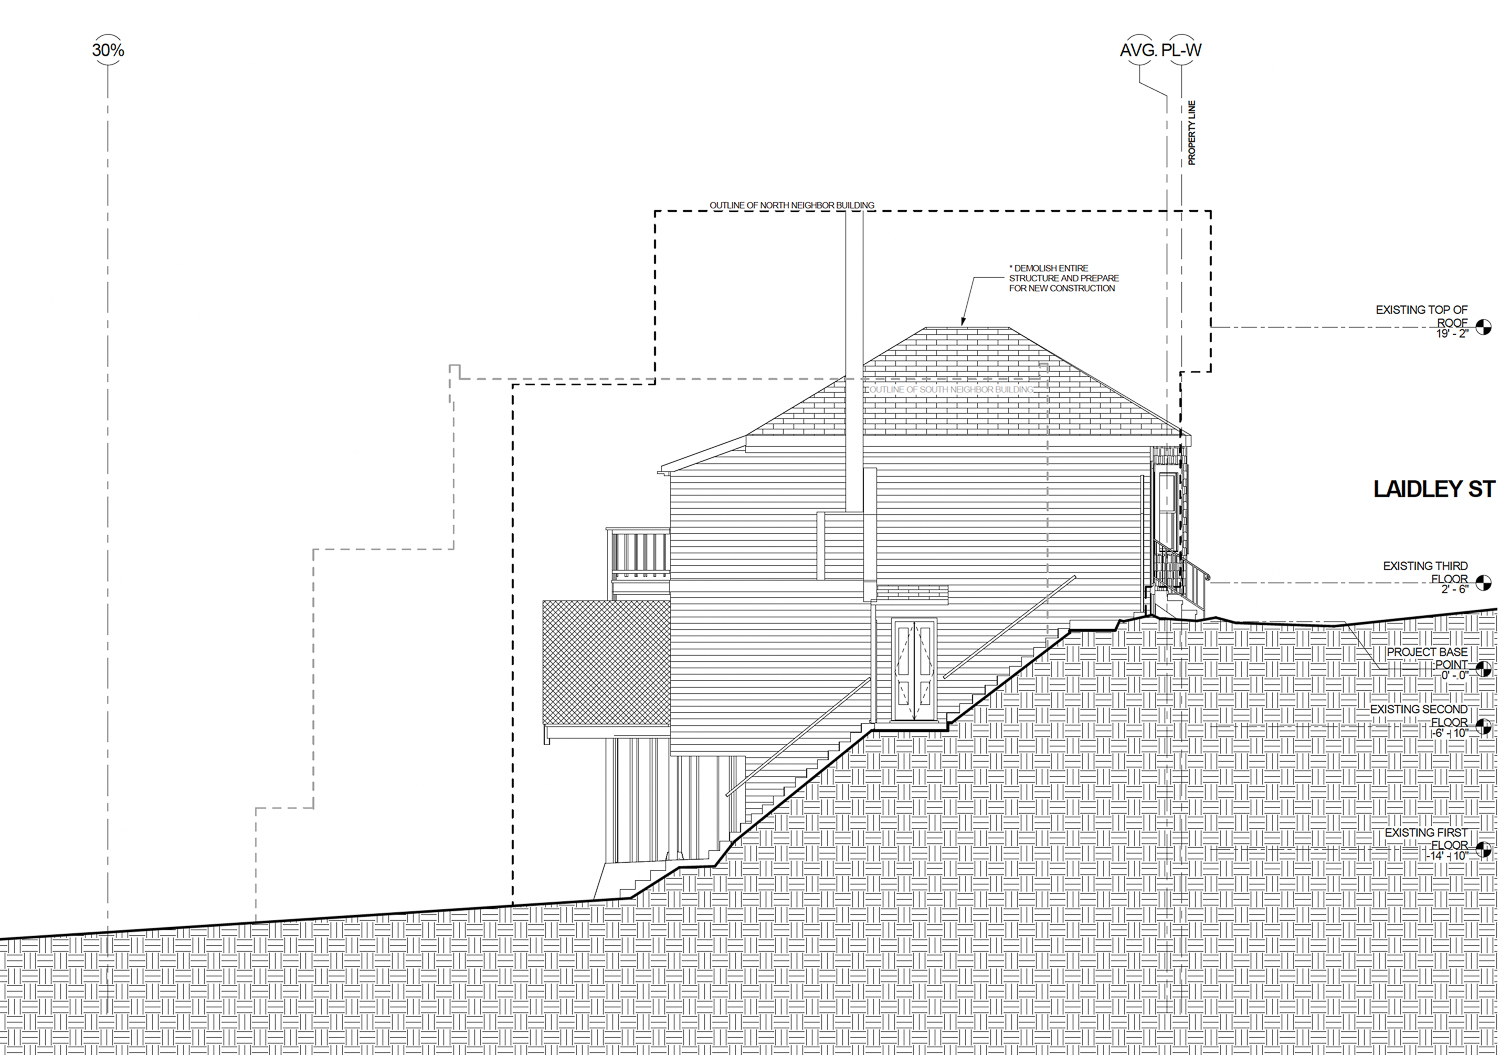 129 Laidley Street existing condition, illustration by Winder Gibson Architects